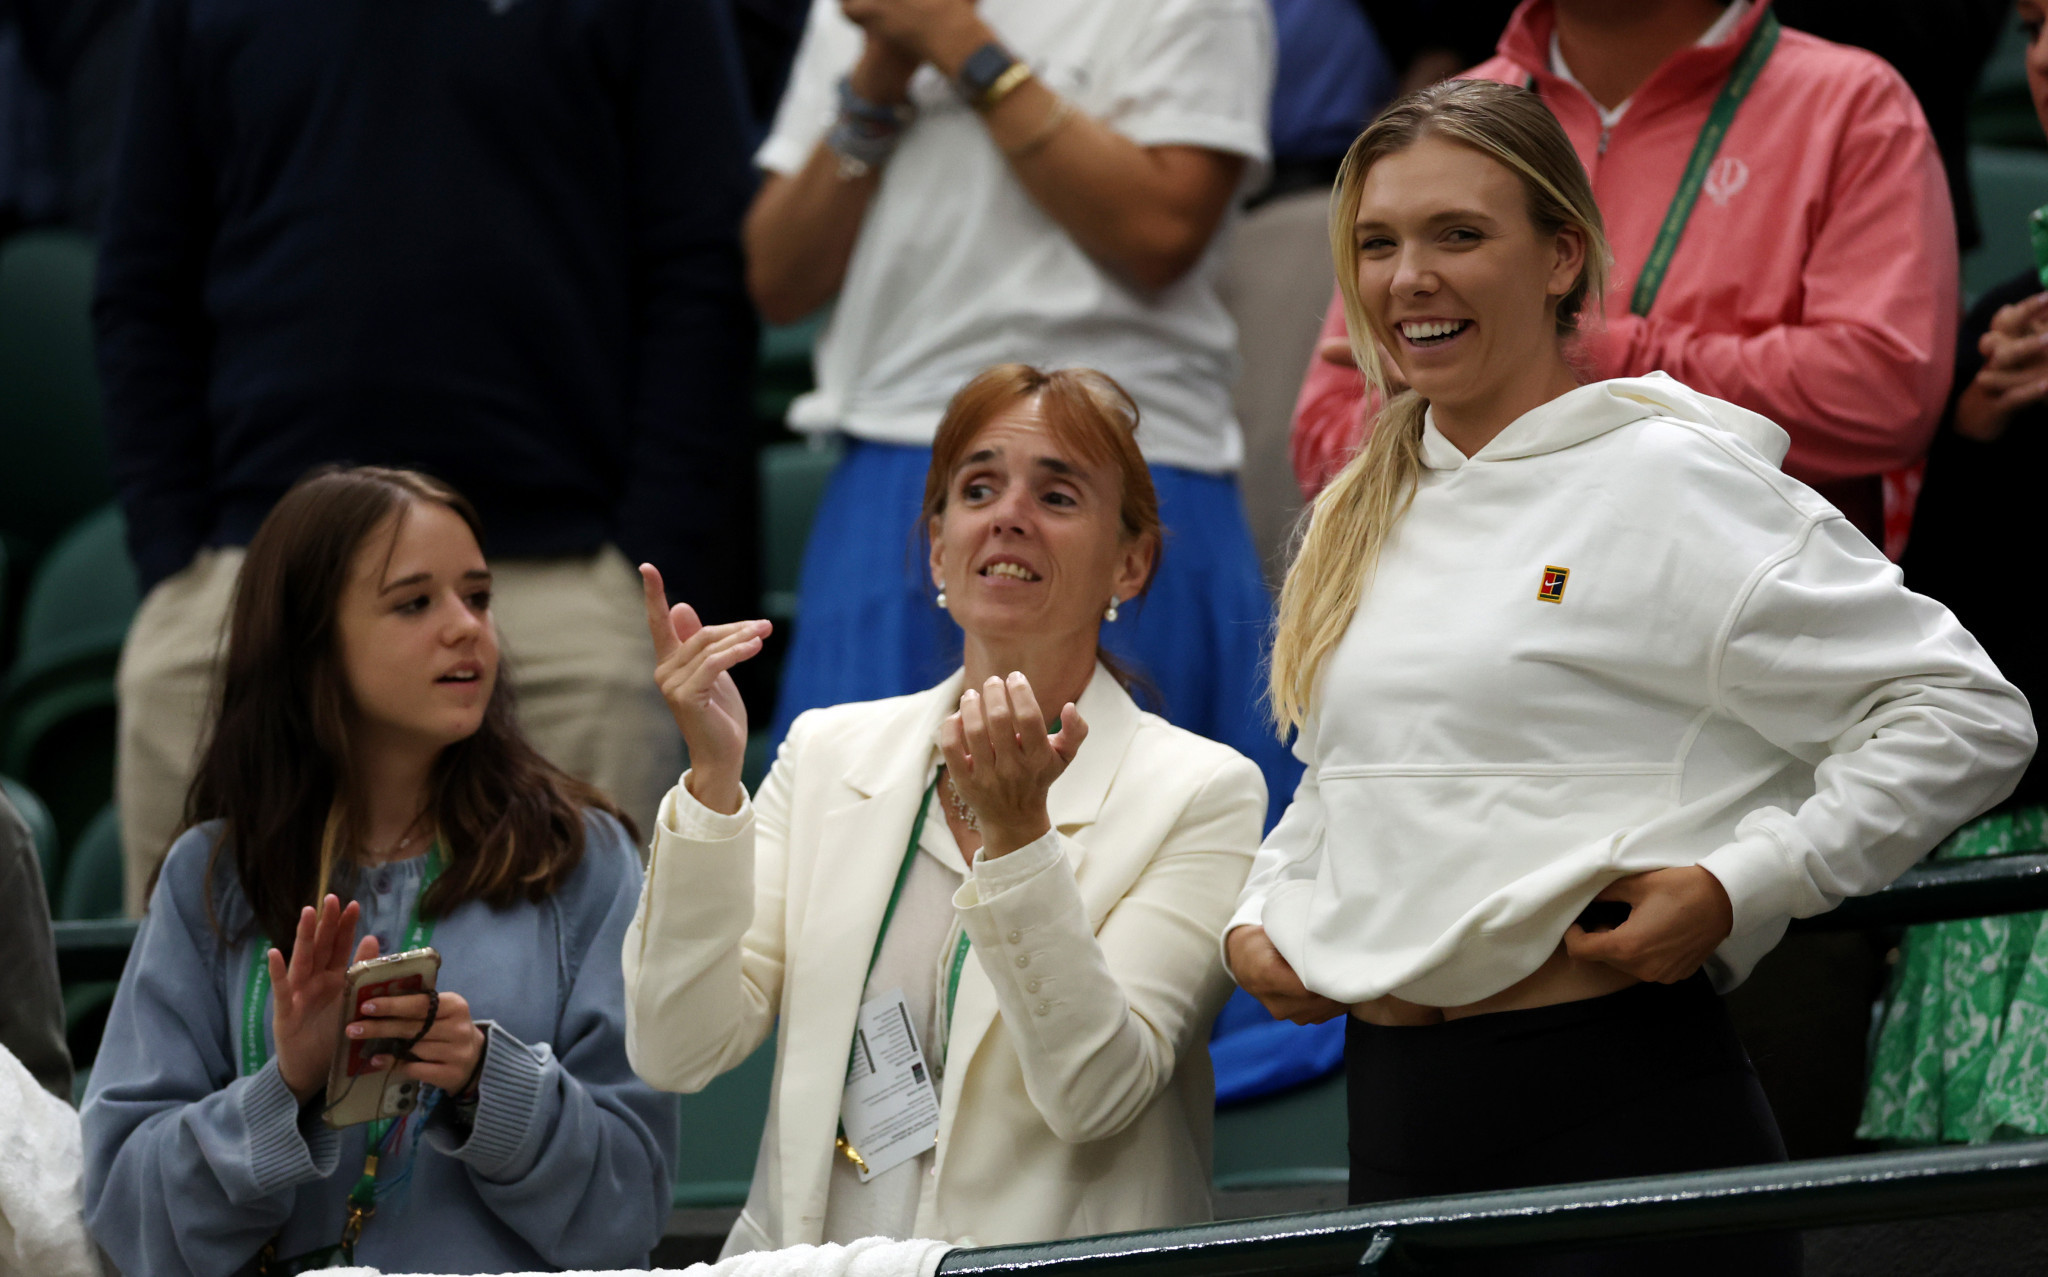 Just a few hours after her win on Centre Court, Katie Boulter, right, is all smiles as she watches her boyfriend Alex De Minaur win his round two match ©Getty Images